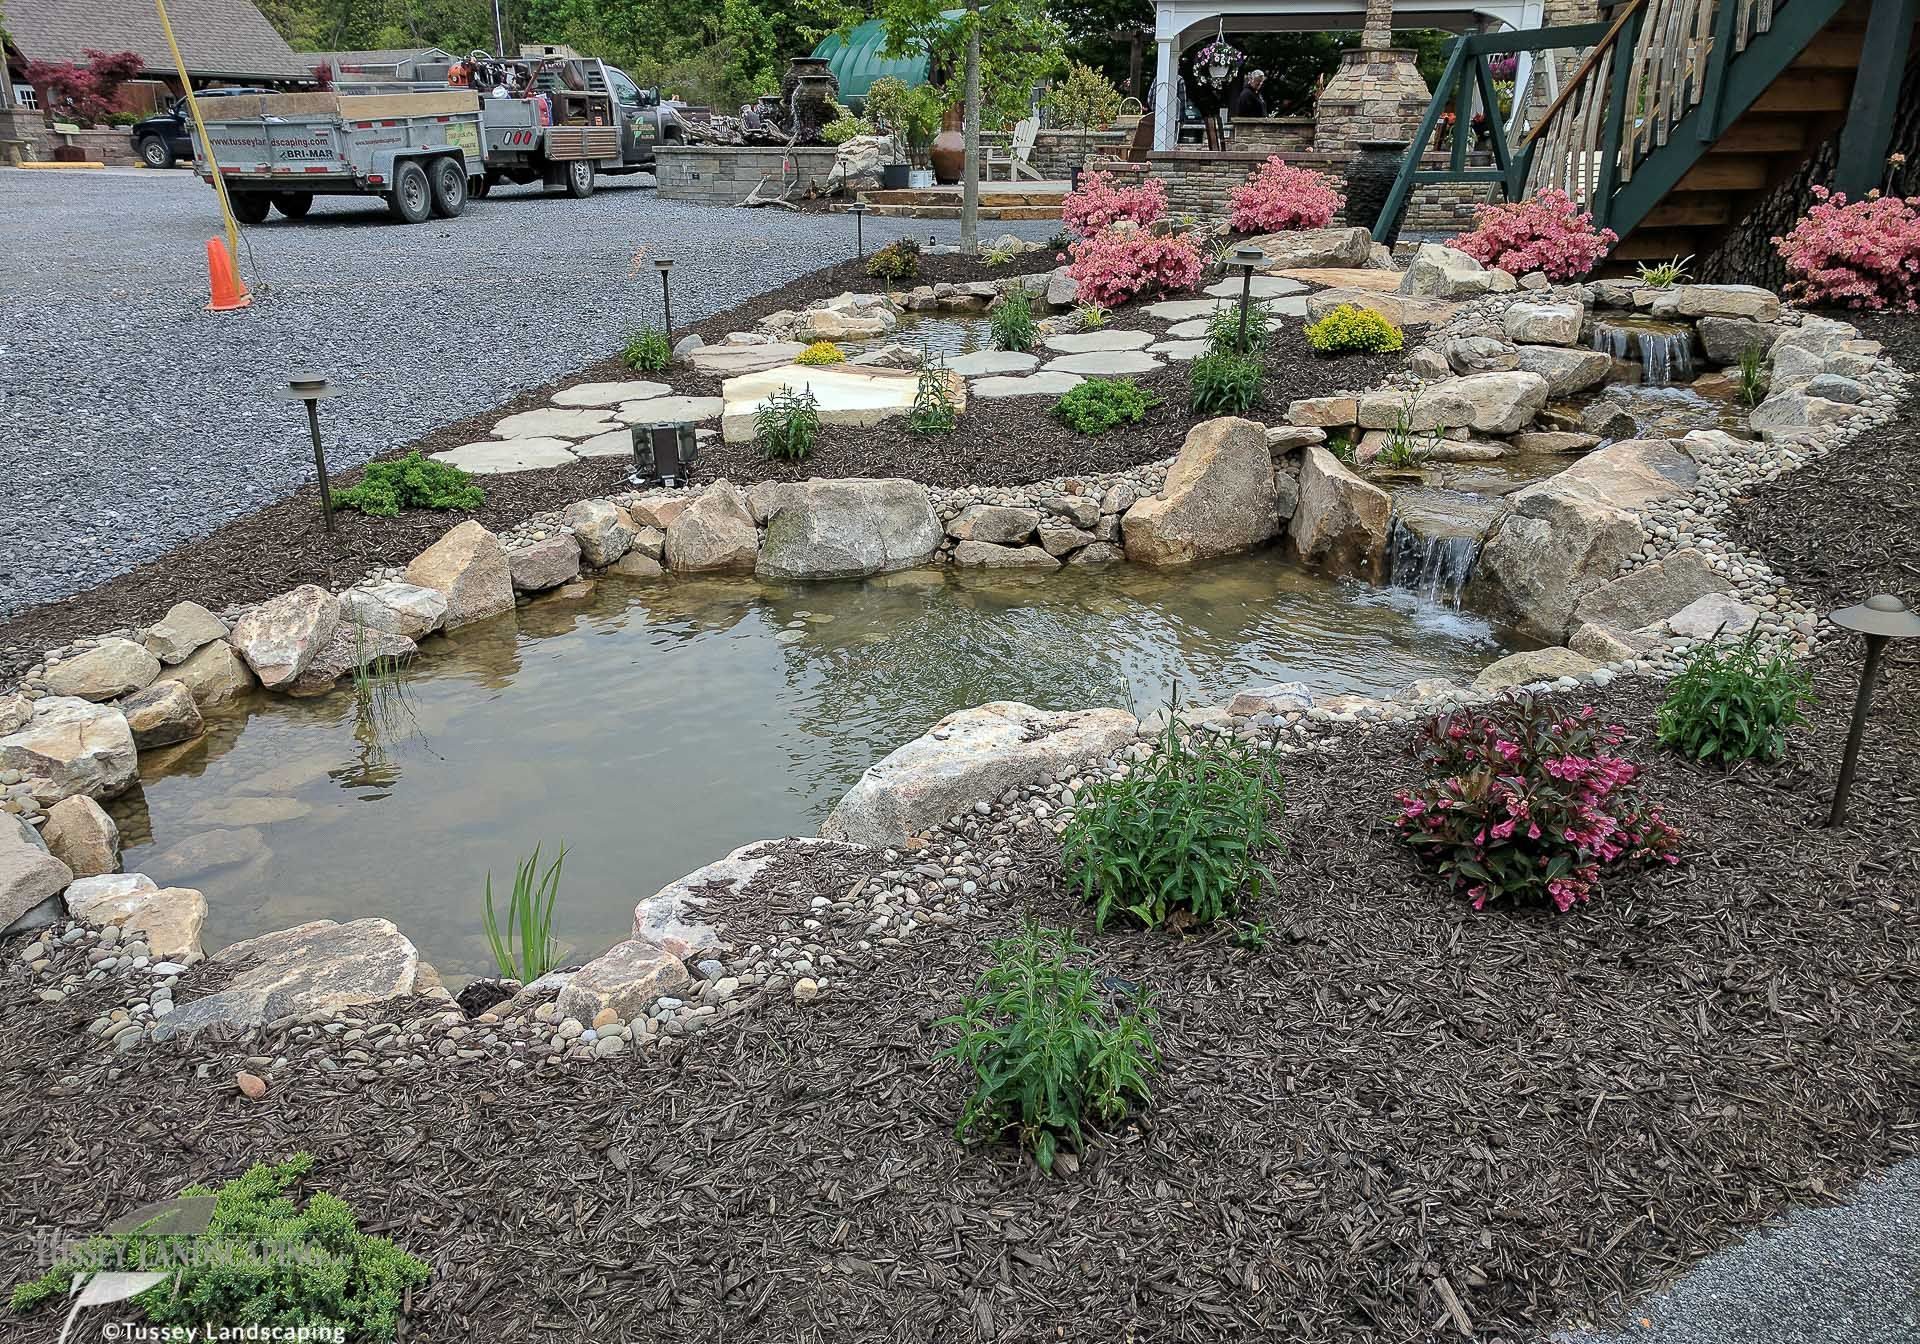 A pond with rocks and plants in front of a house.